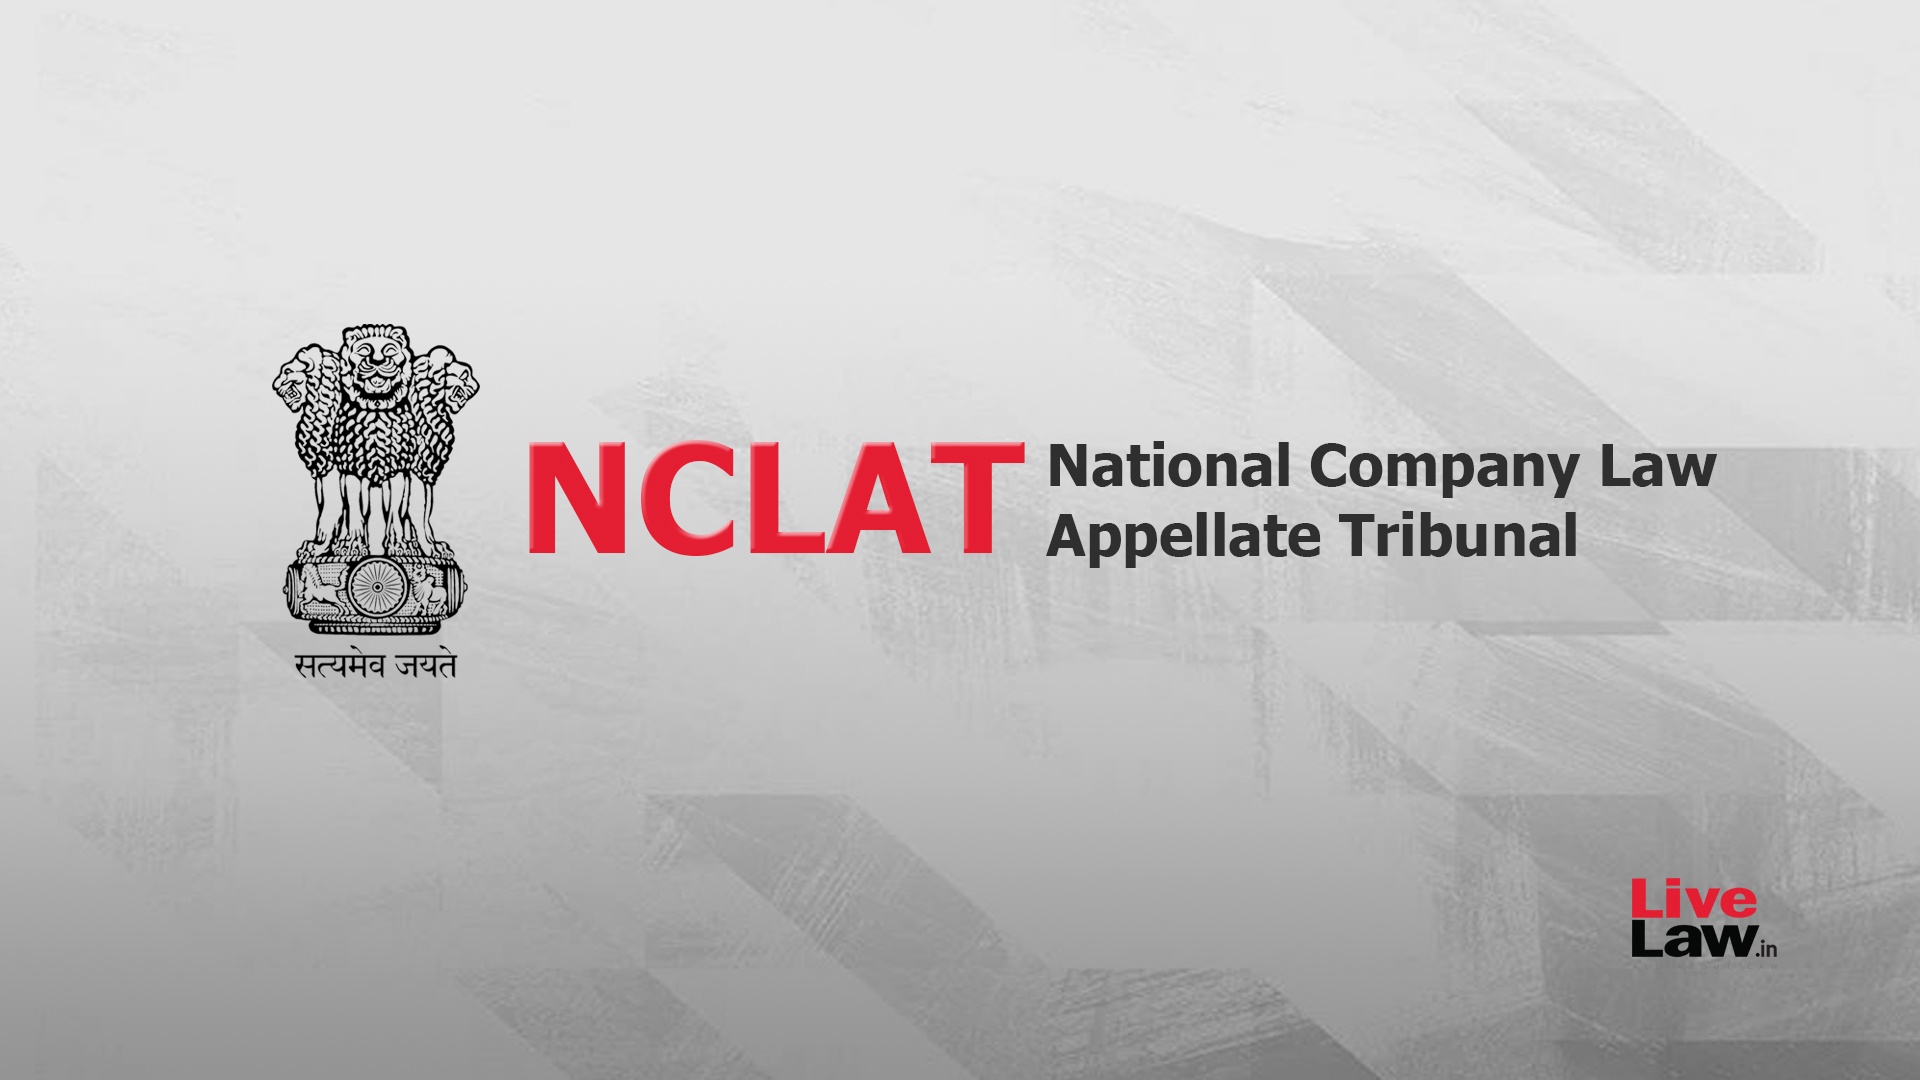 Even If Credit Facility Agreement Is Unstamped, Section 7 Petition Is Maintainable, On Proving Financial Debt : NCLAT Principal Bench